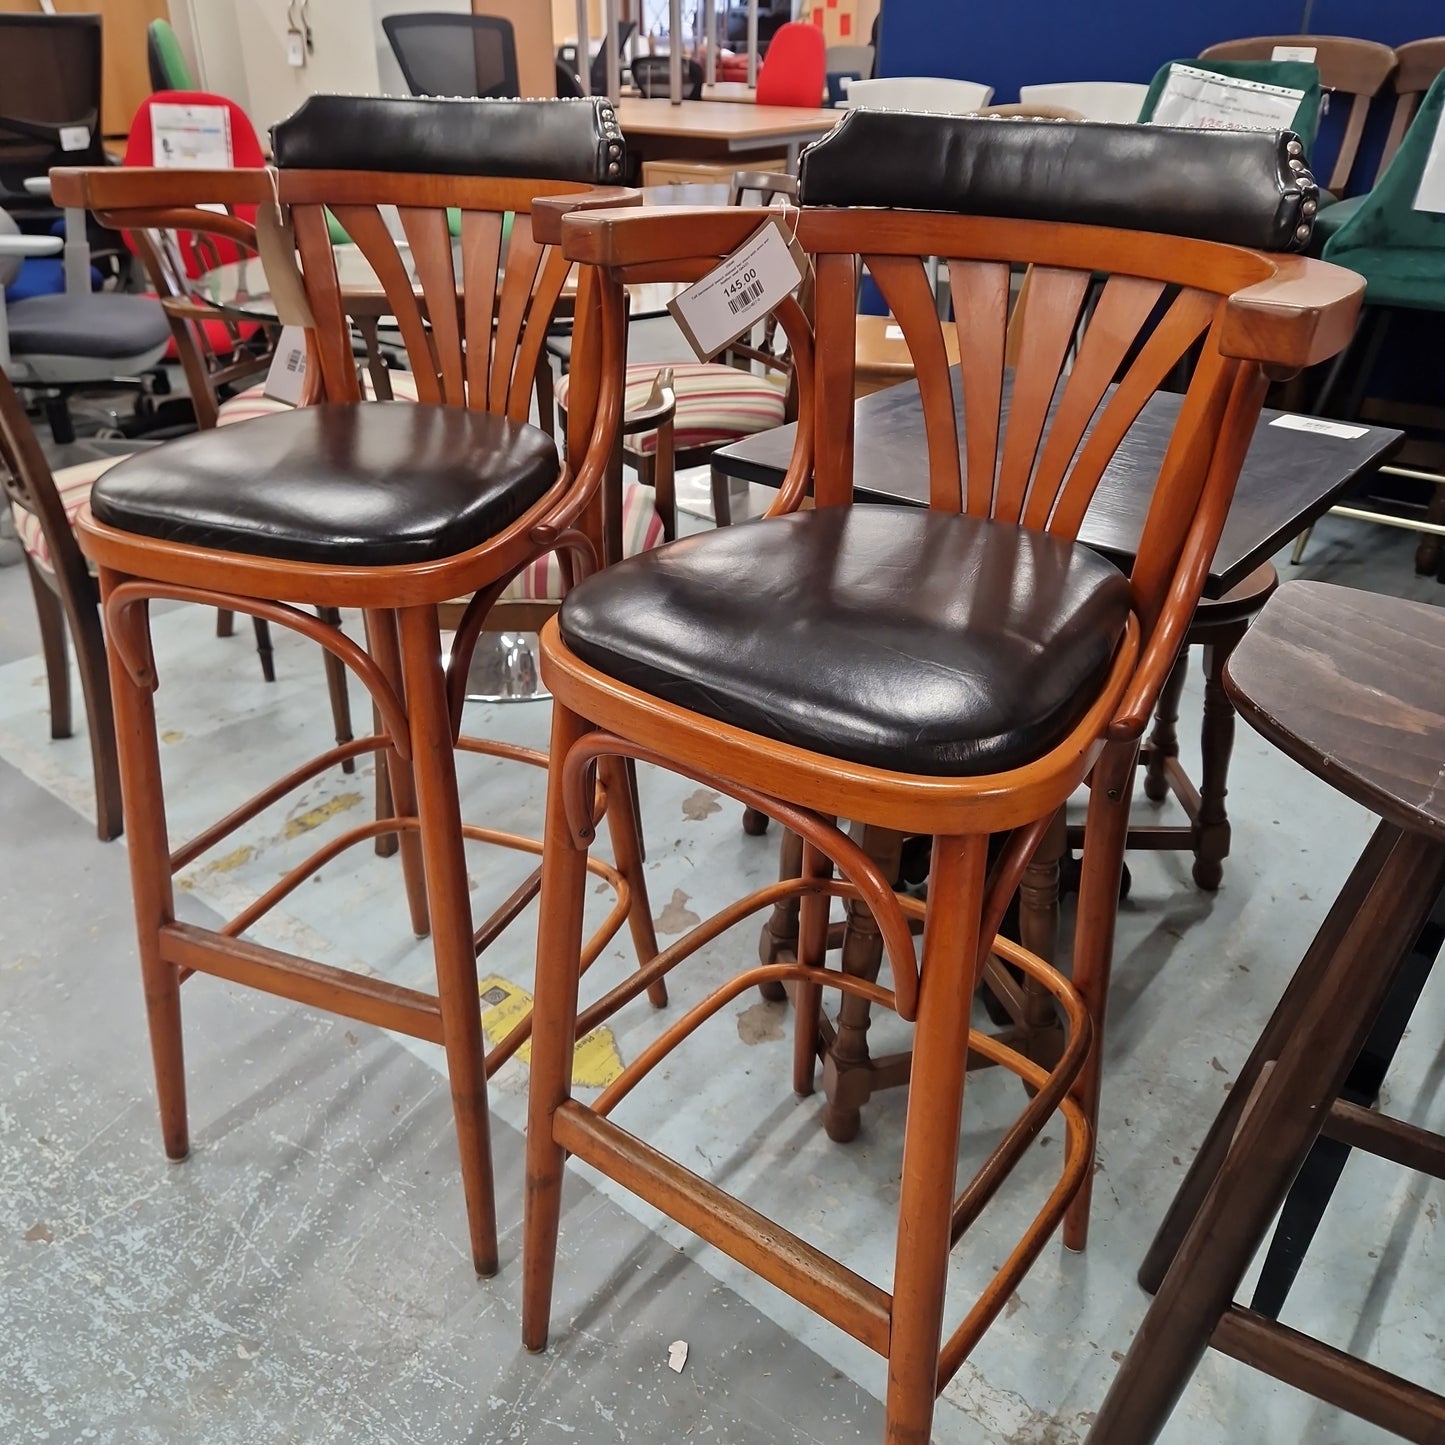 Tall bentwood beech stained bar stool with arms and leather seat Q4323